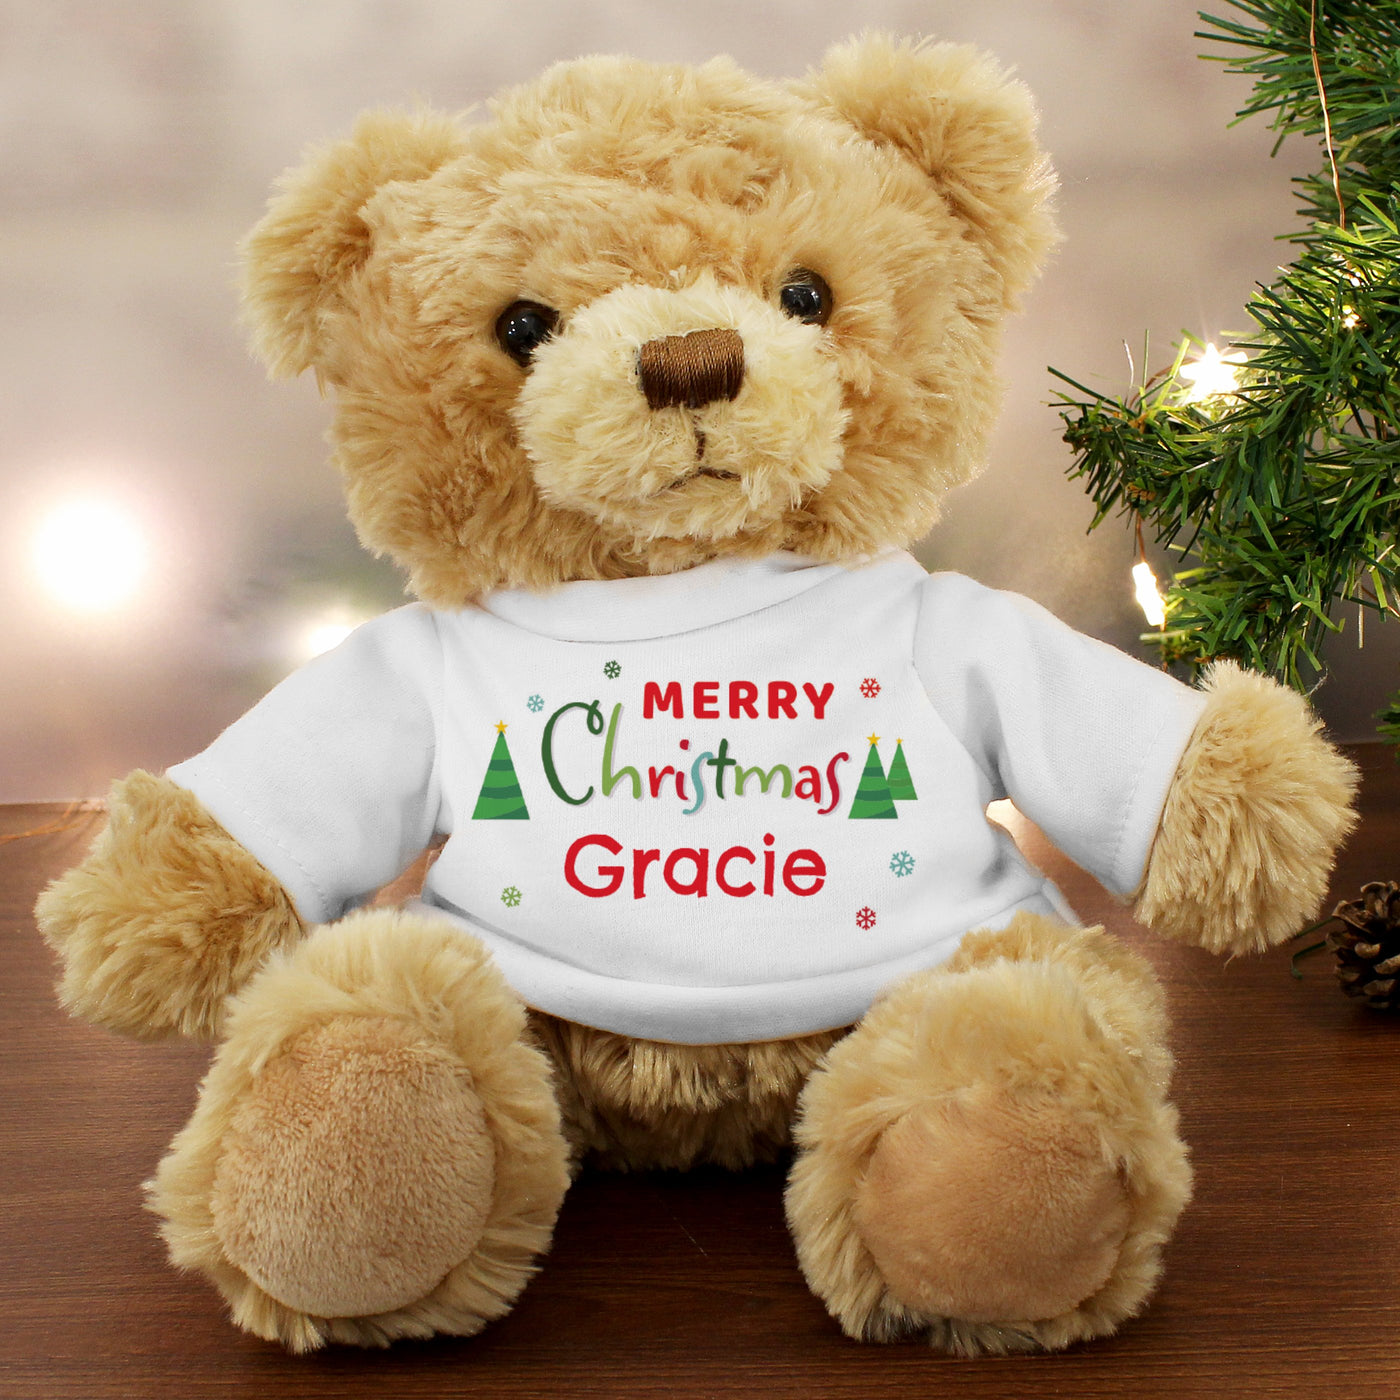 Personalised Merry Christmas Teddy Bear - Shop Personalised Gifts